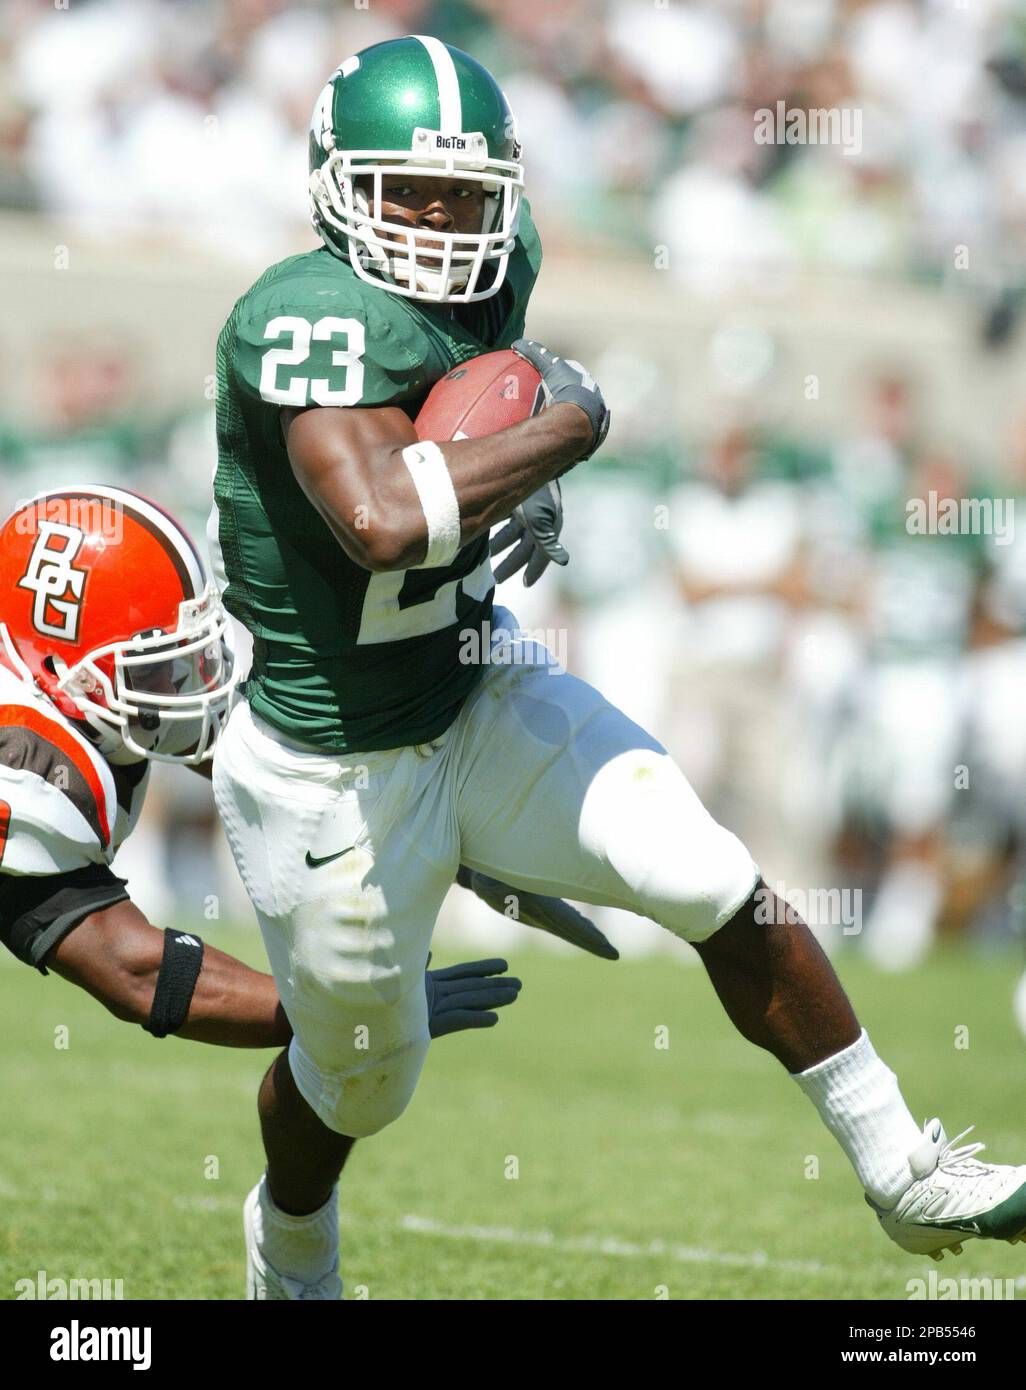 Michigan State's Javon Ringer (23) runs for a first-quarter 4-yard  touchdown around Bowling Green's Loren Hargrove during a football game  Saturday, Sept. 8, 2007, in East Lansing, Mich. (AP Photo/Al Goldis Stock